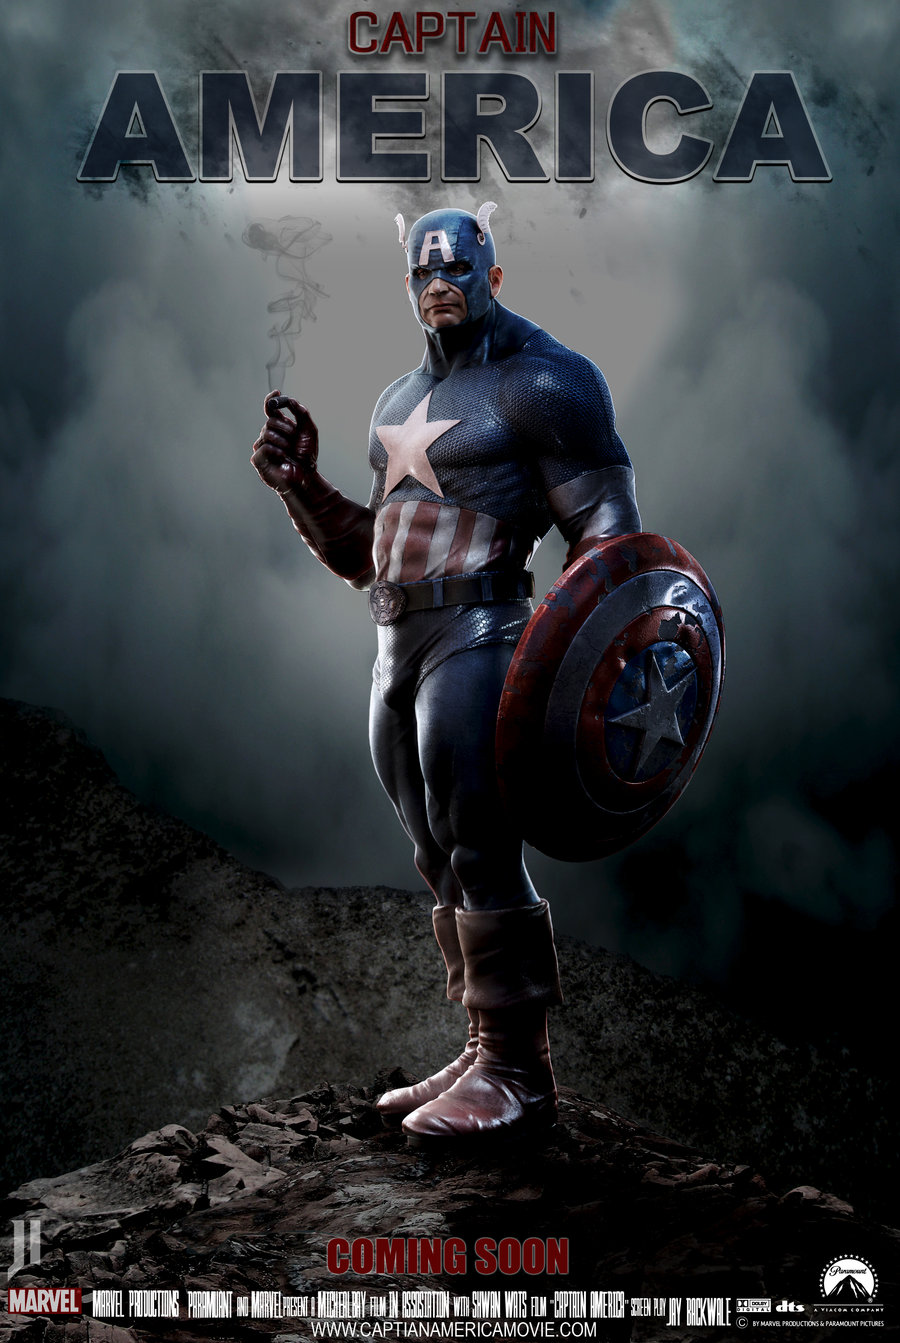 Captain America and Human Experimentations